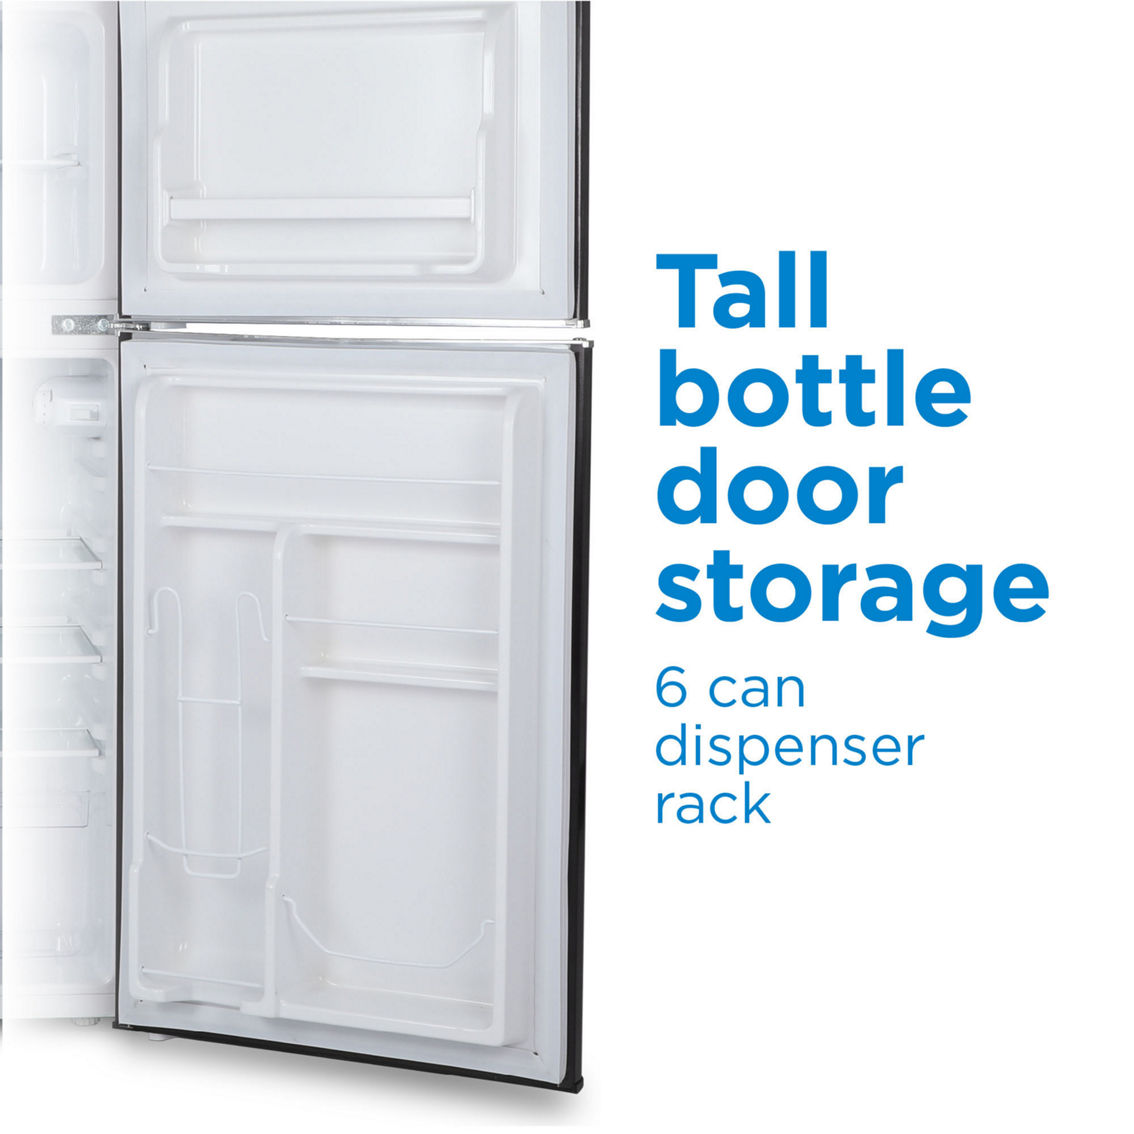 Commercial Cool 4.5 Cubic Foot TM Retro Refrigerator - Image 7 of 7